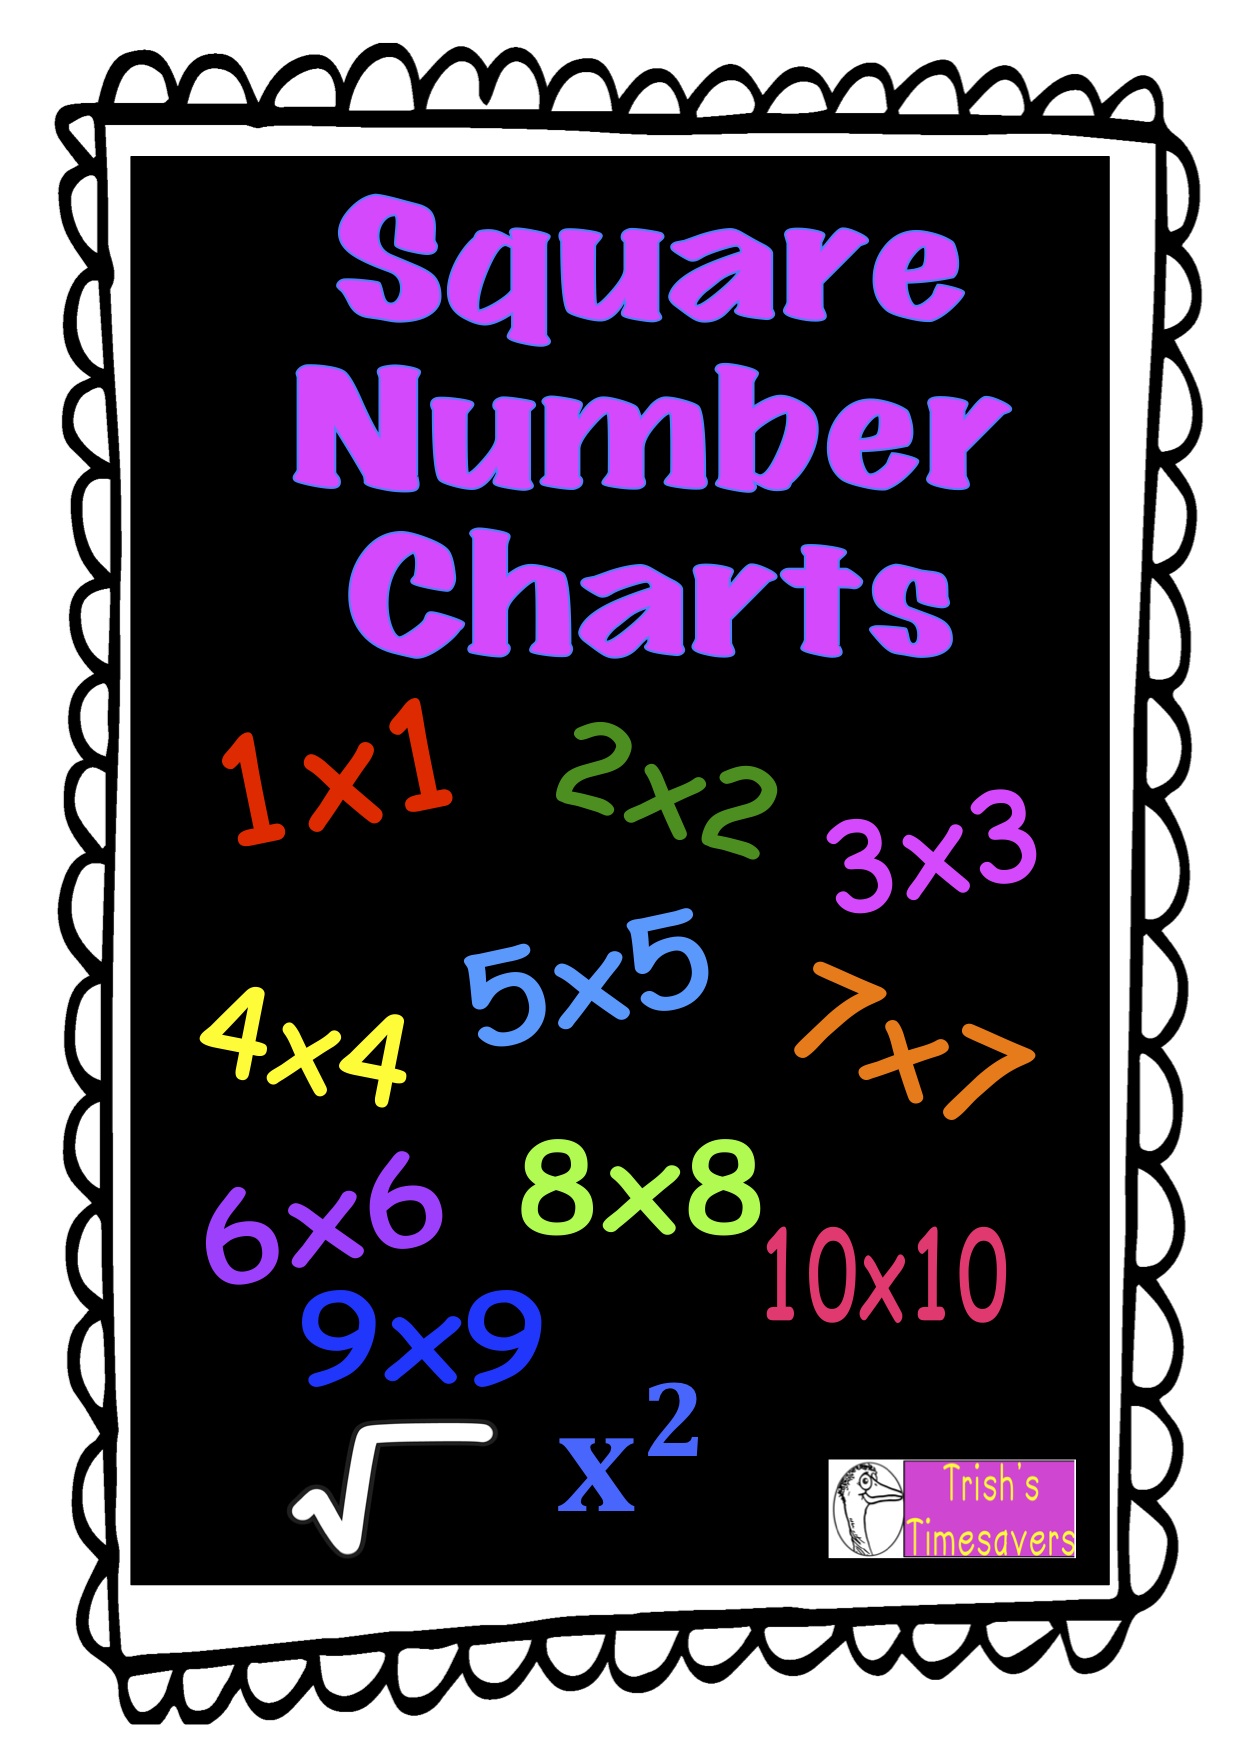 Square Number Charts